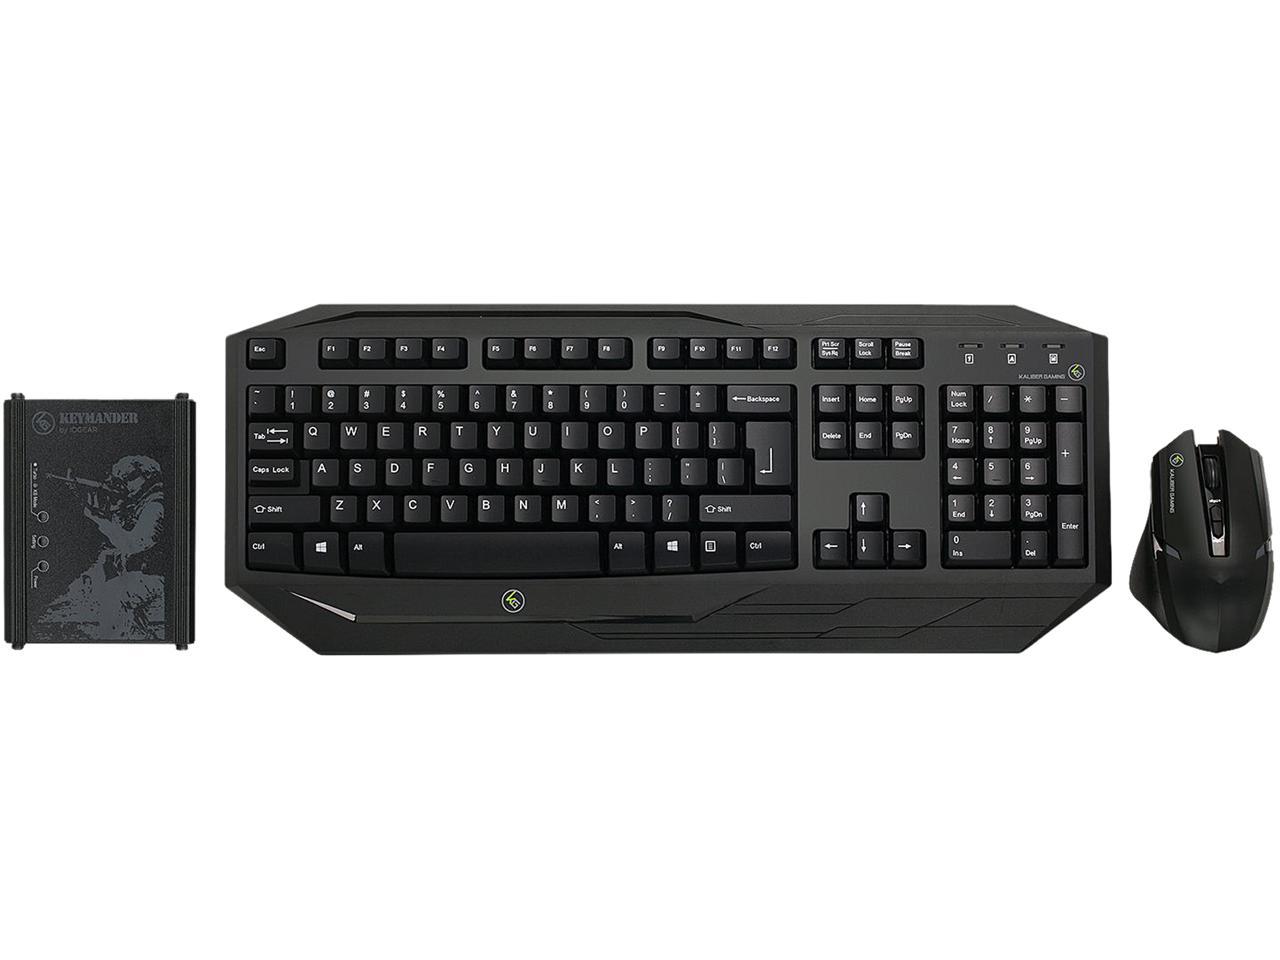 IOGEAR KeyMander Keyboard And Mouse Adapter Kit for PS4, PS3, Xbox One and Xbox 360 with Wireless Keyboard and Mouse